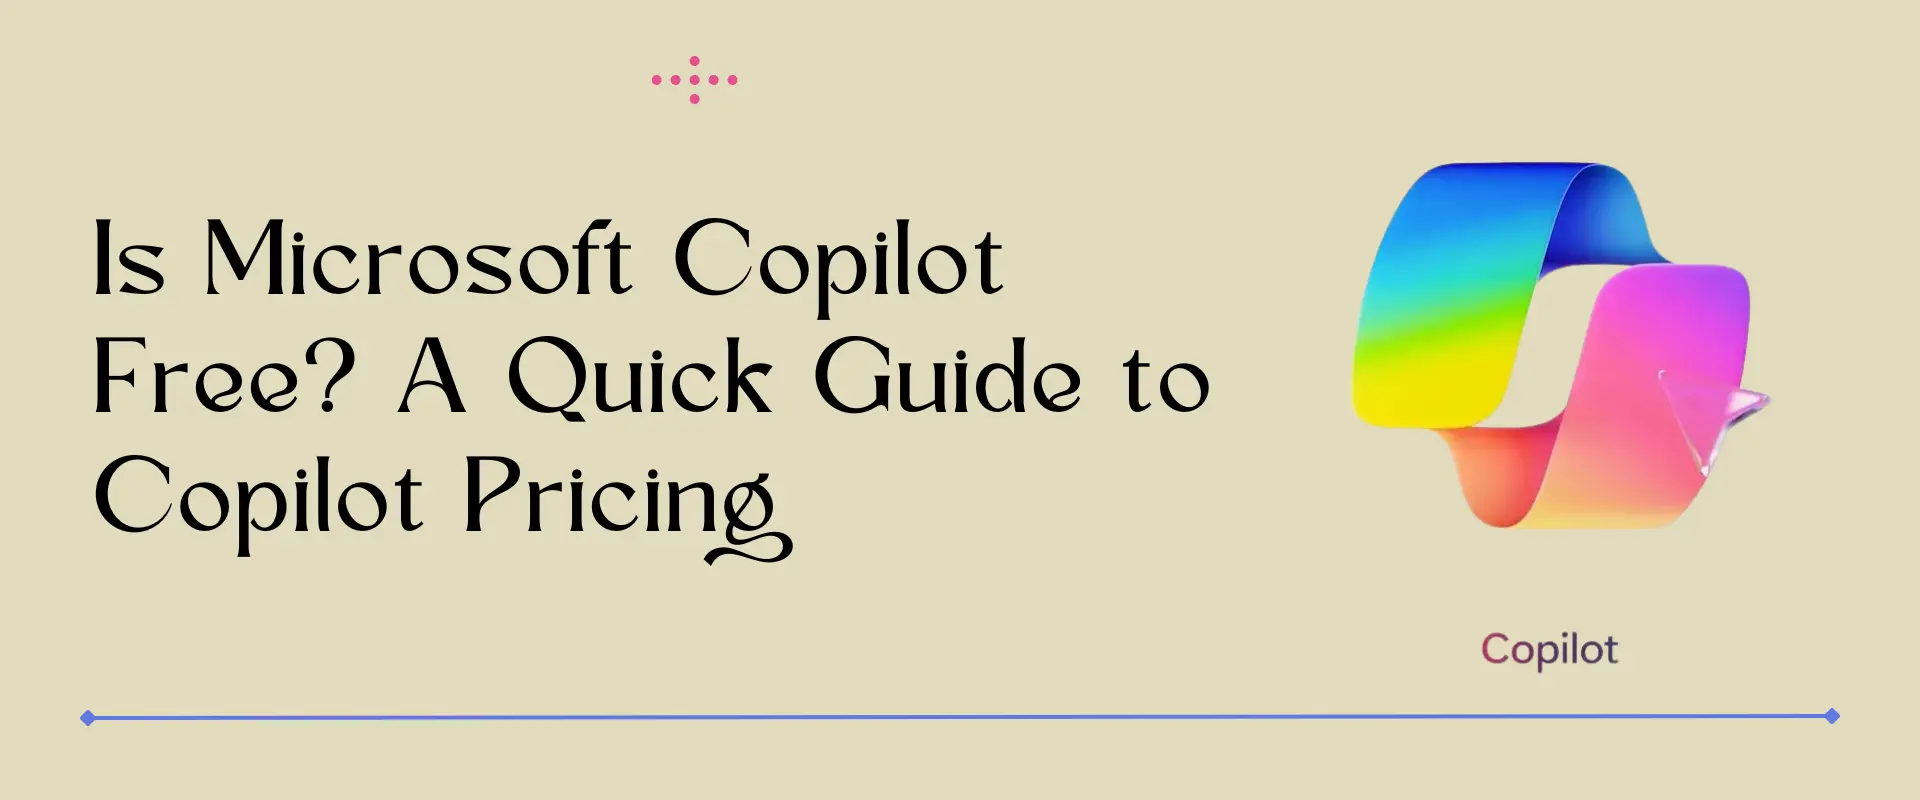 Is Microsoft Copilot Free? A Quick Guide to Copilot Pricing